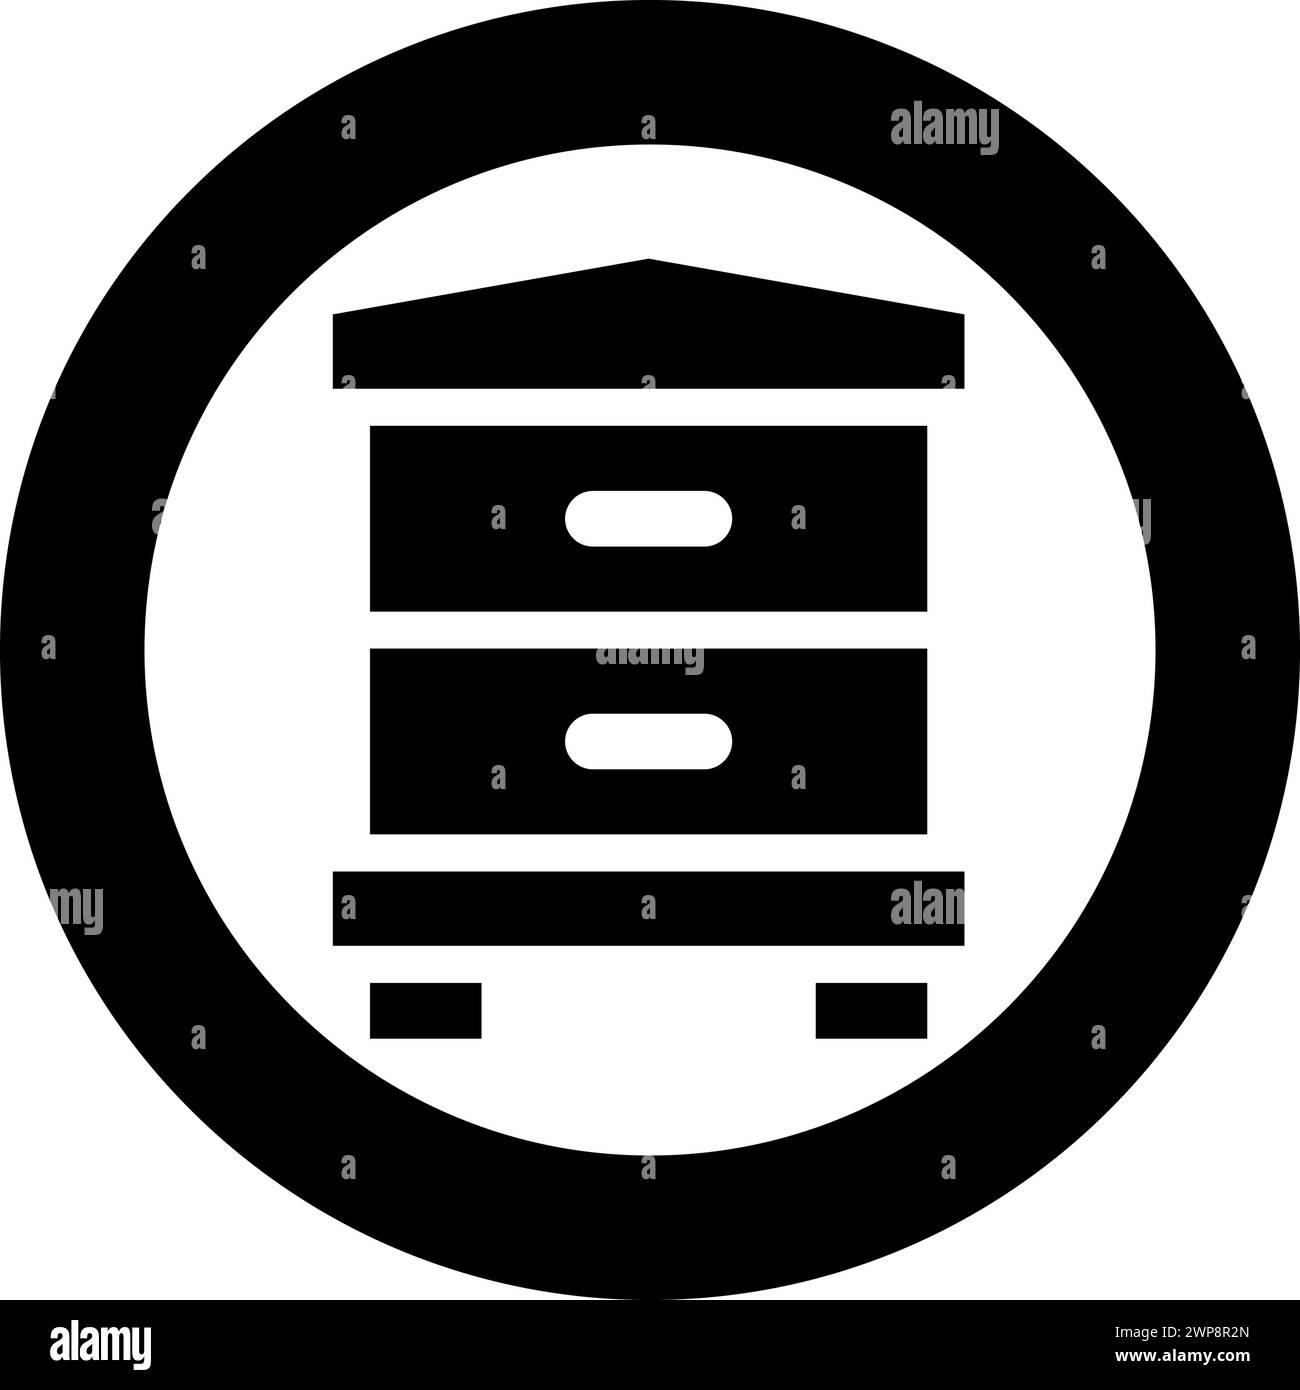 Hive bee house beehive apiary apiculture concept icon in circle round black color vector illustration image solid outline style simple Stock Vector